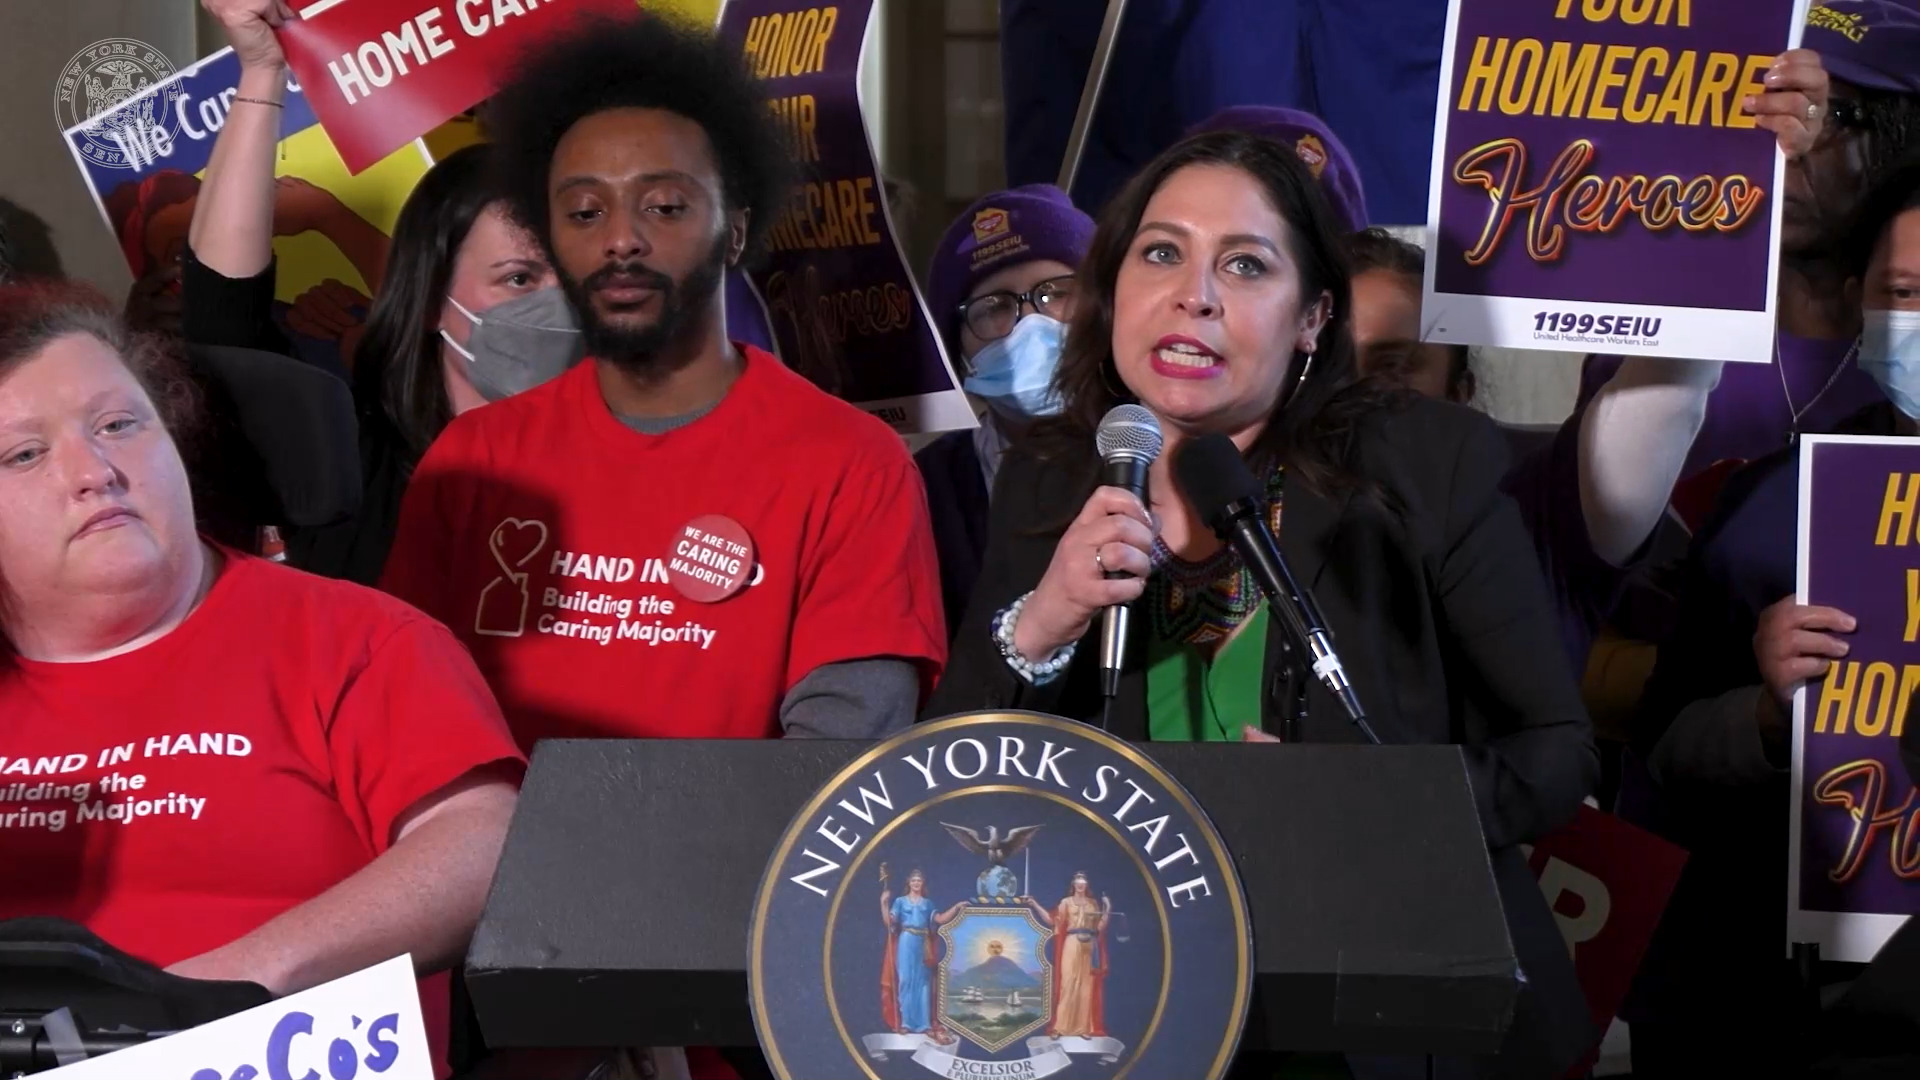 Gonzalez-Rojas Calls for Fair Pay for Home Care Workers